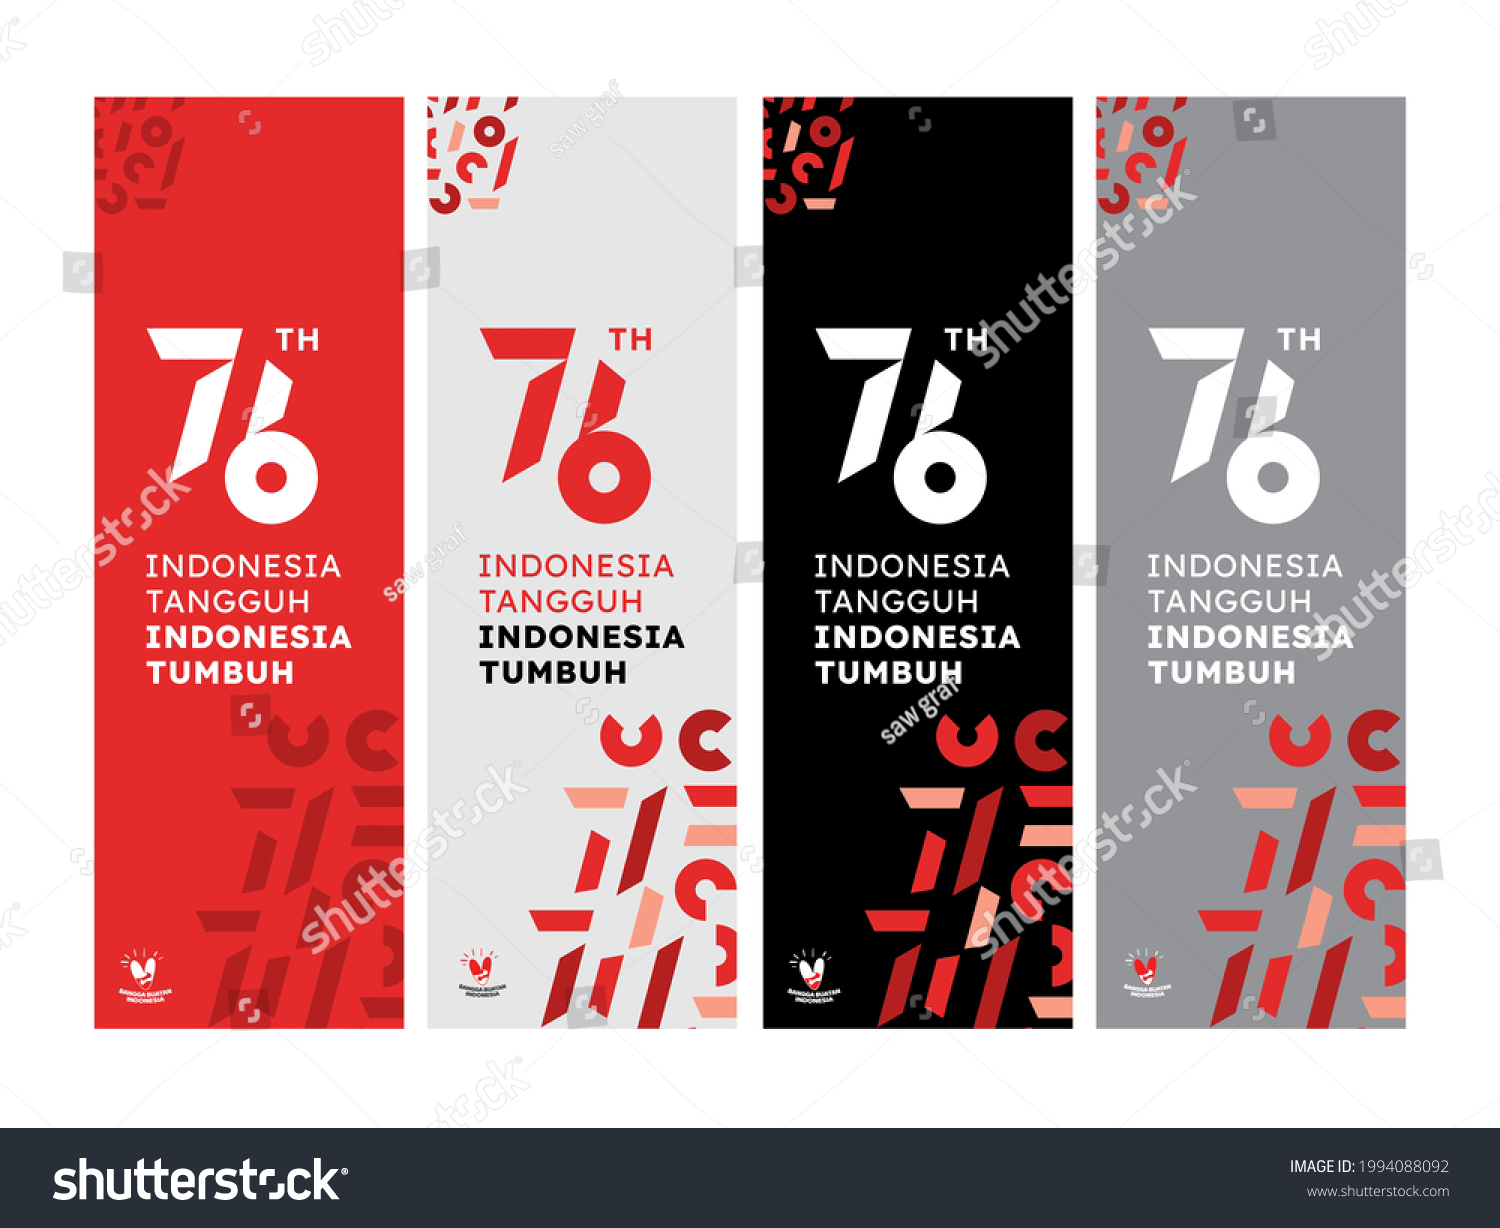 The 76th Indonesia National Day Logo Abstract Royalty Free Stock Vector 1994088092 0884